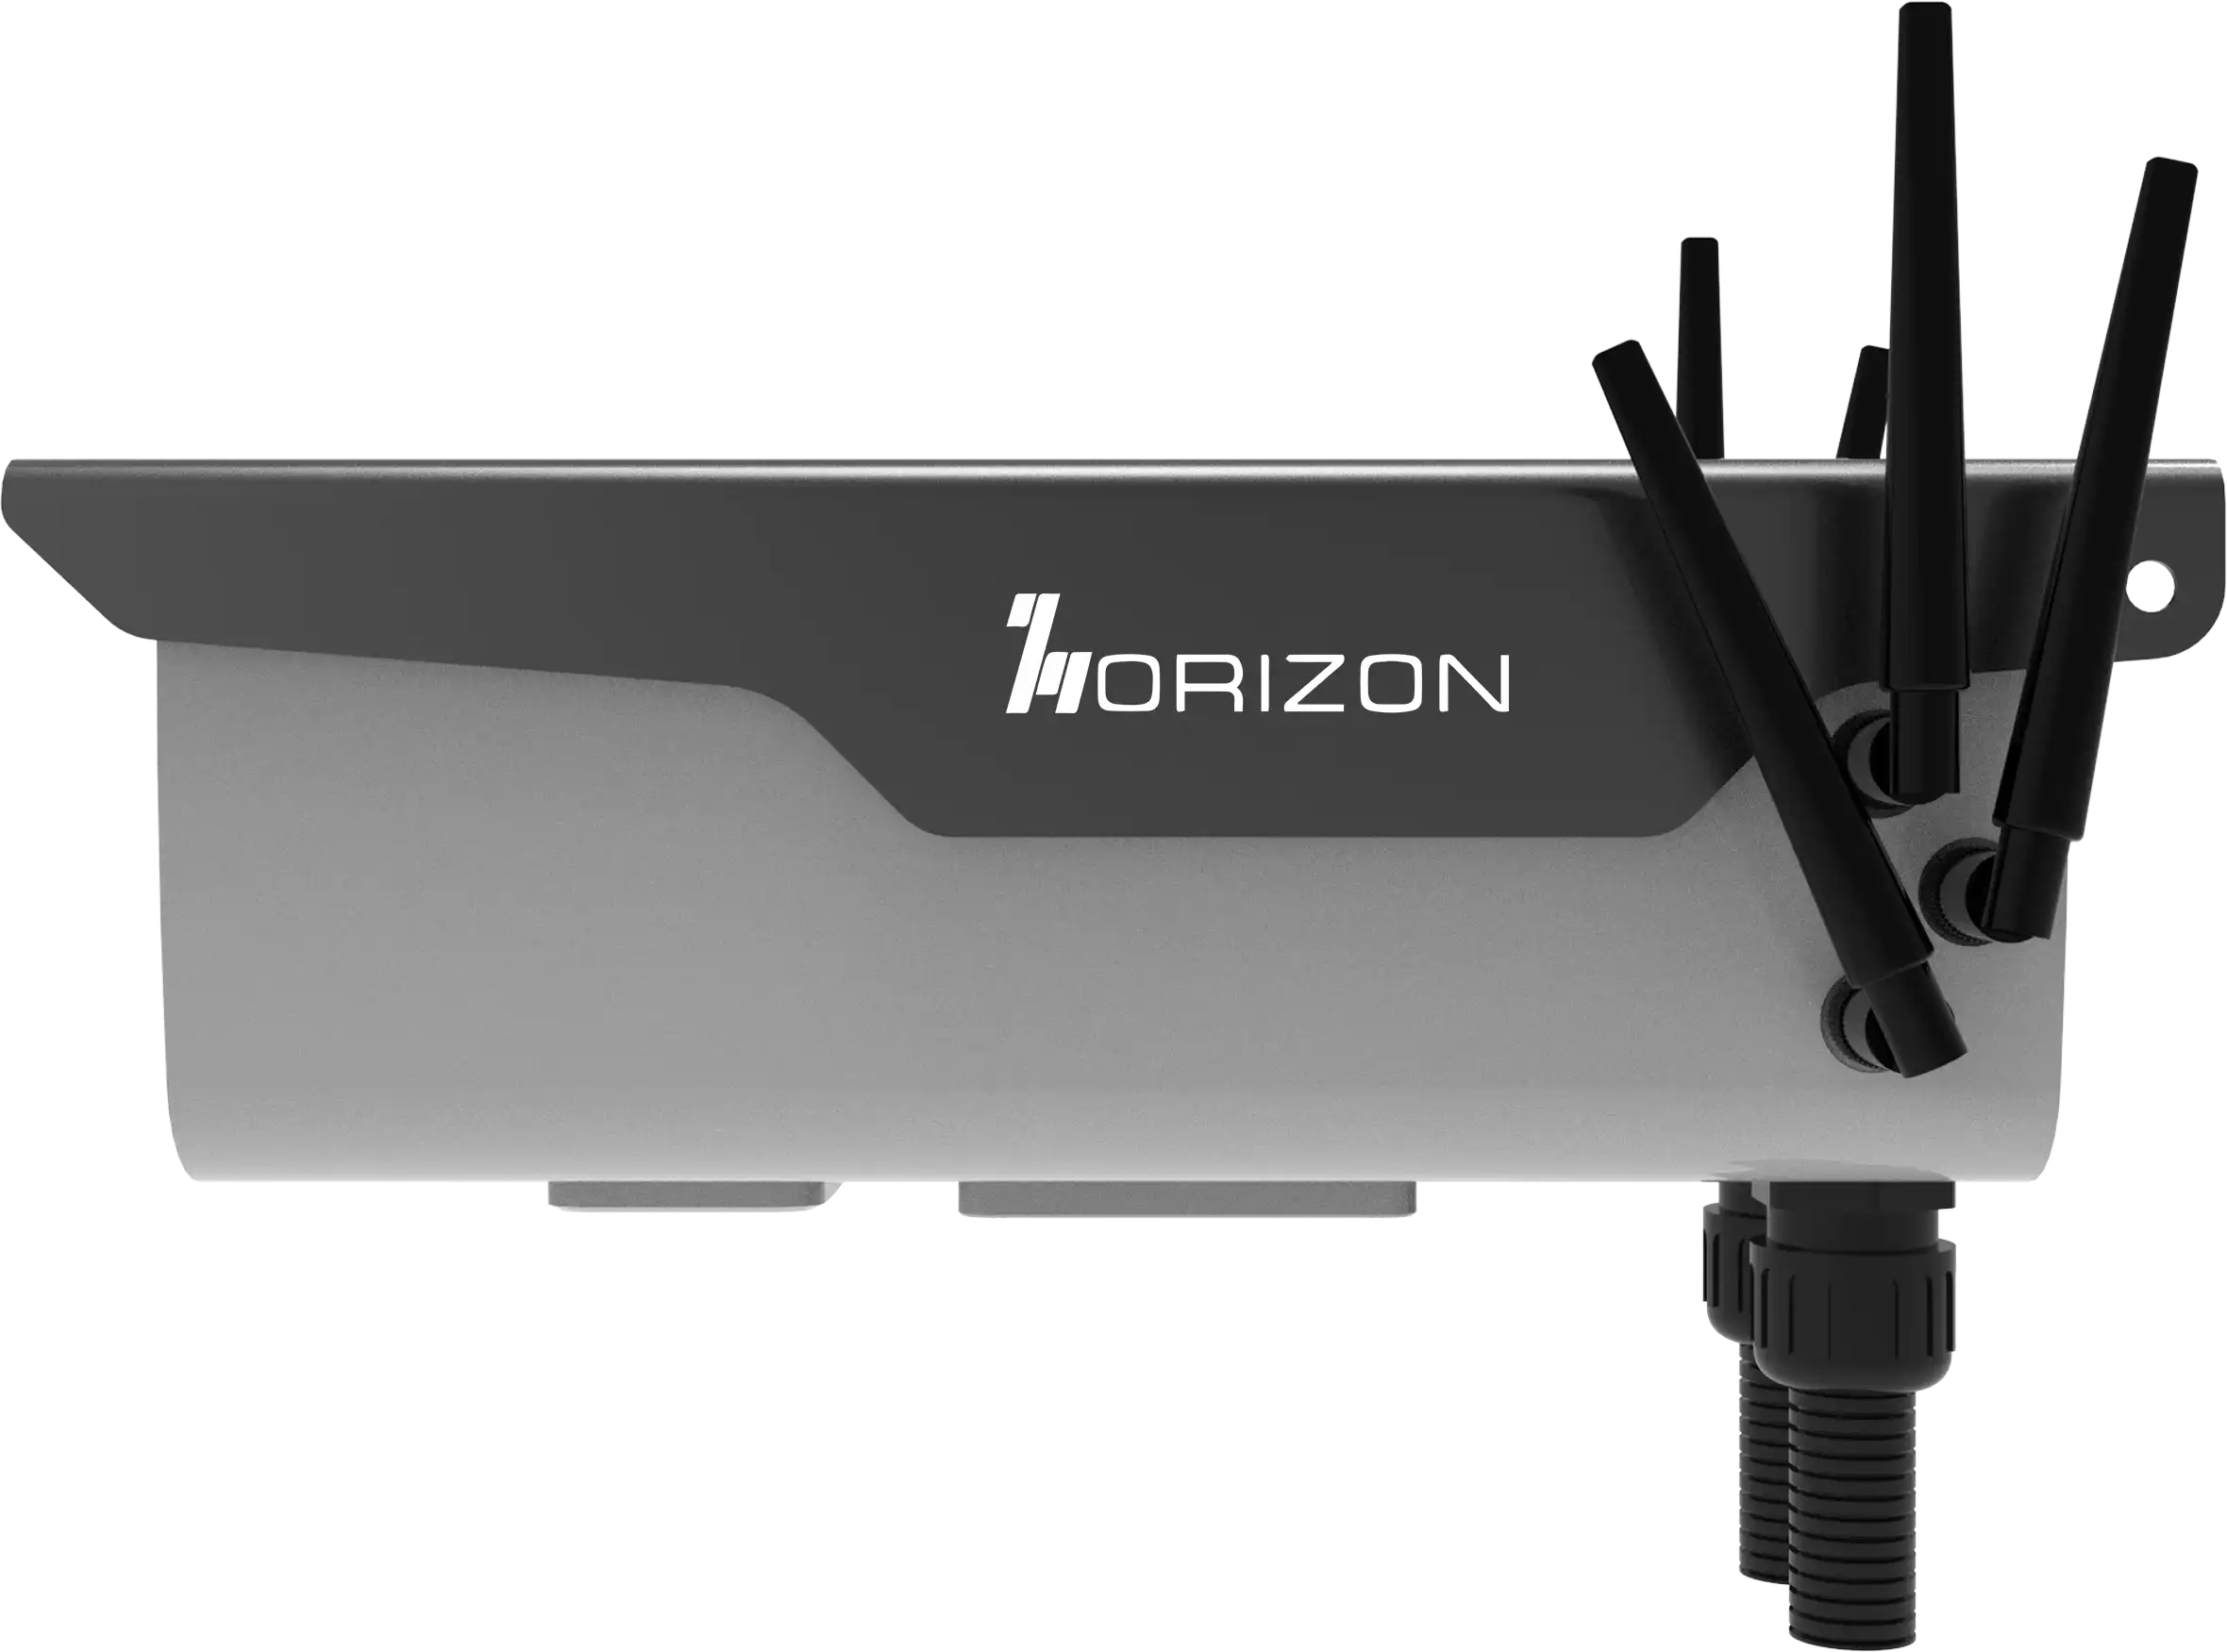 Horizon Powered CBRS CC1005G 5G LTE GSM Camera Right Side View light Gray Casing with black shade with horizon Logo, 3 Antennas for 5G, Wifi, and GPS